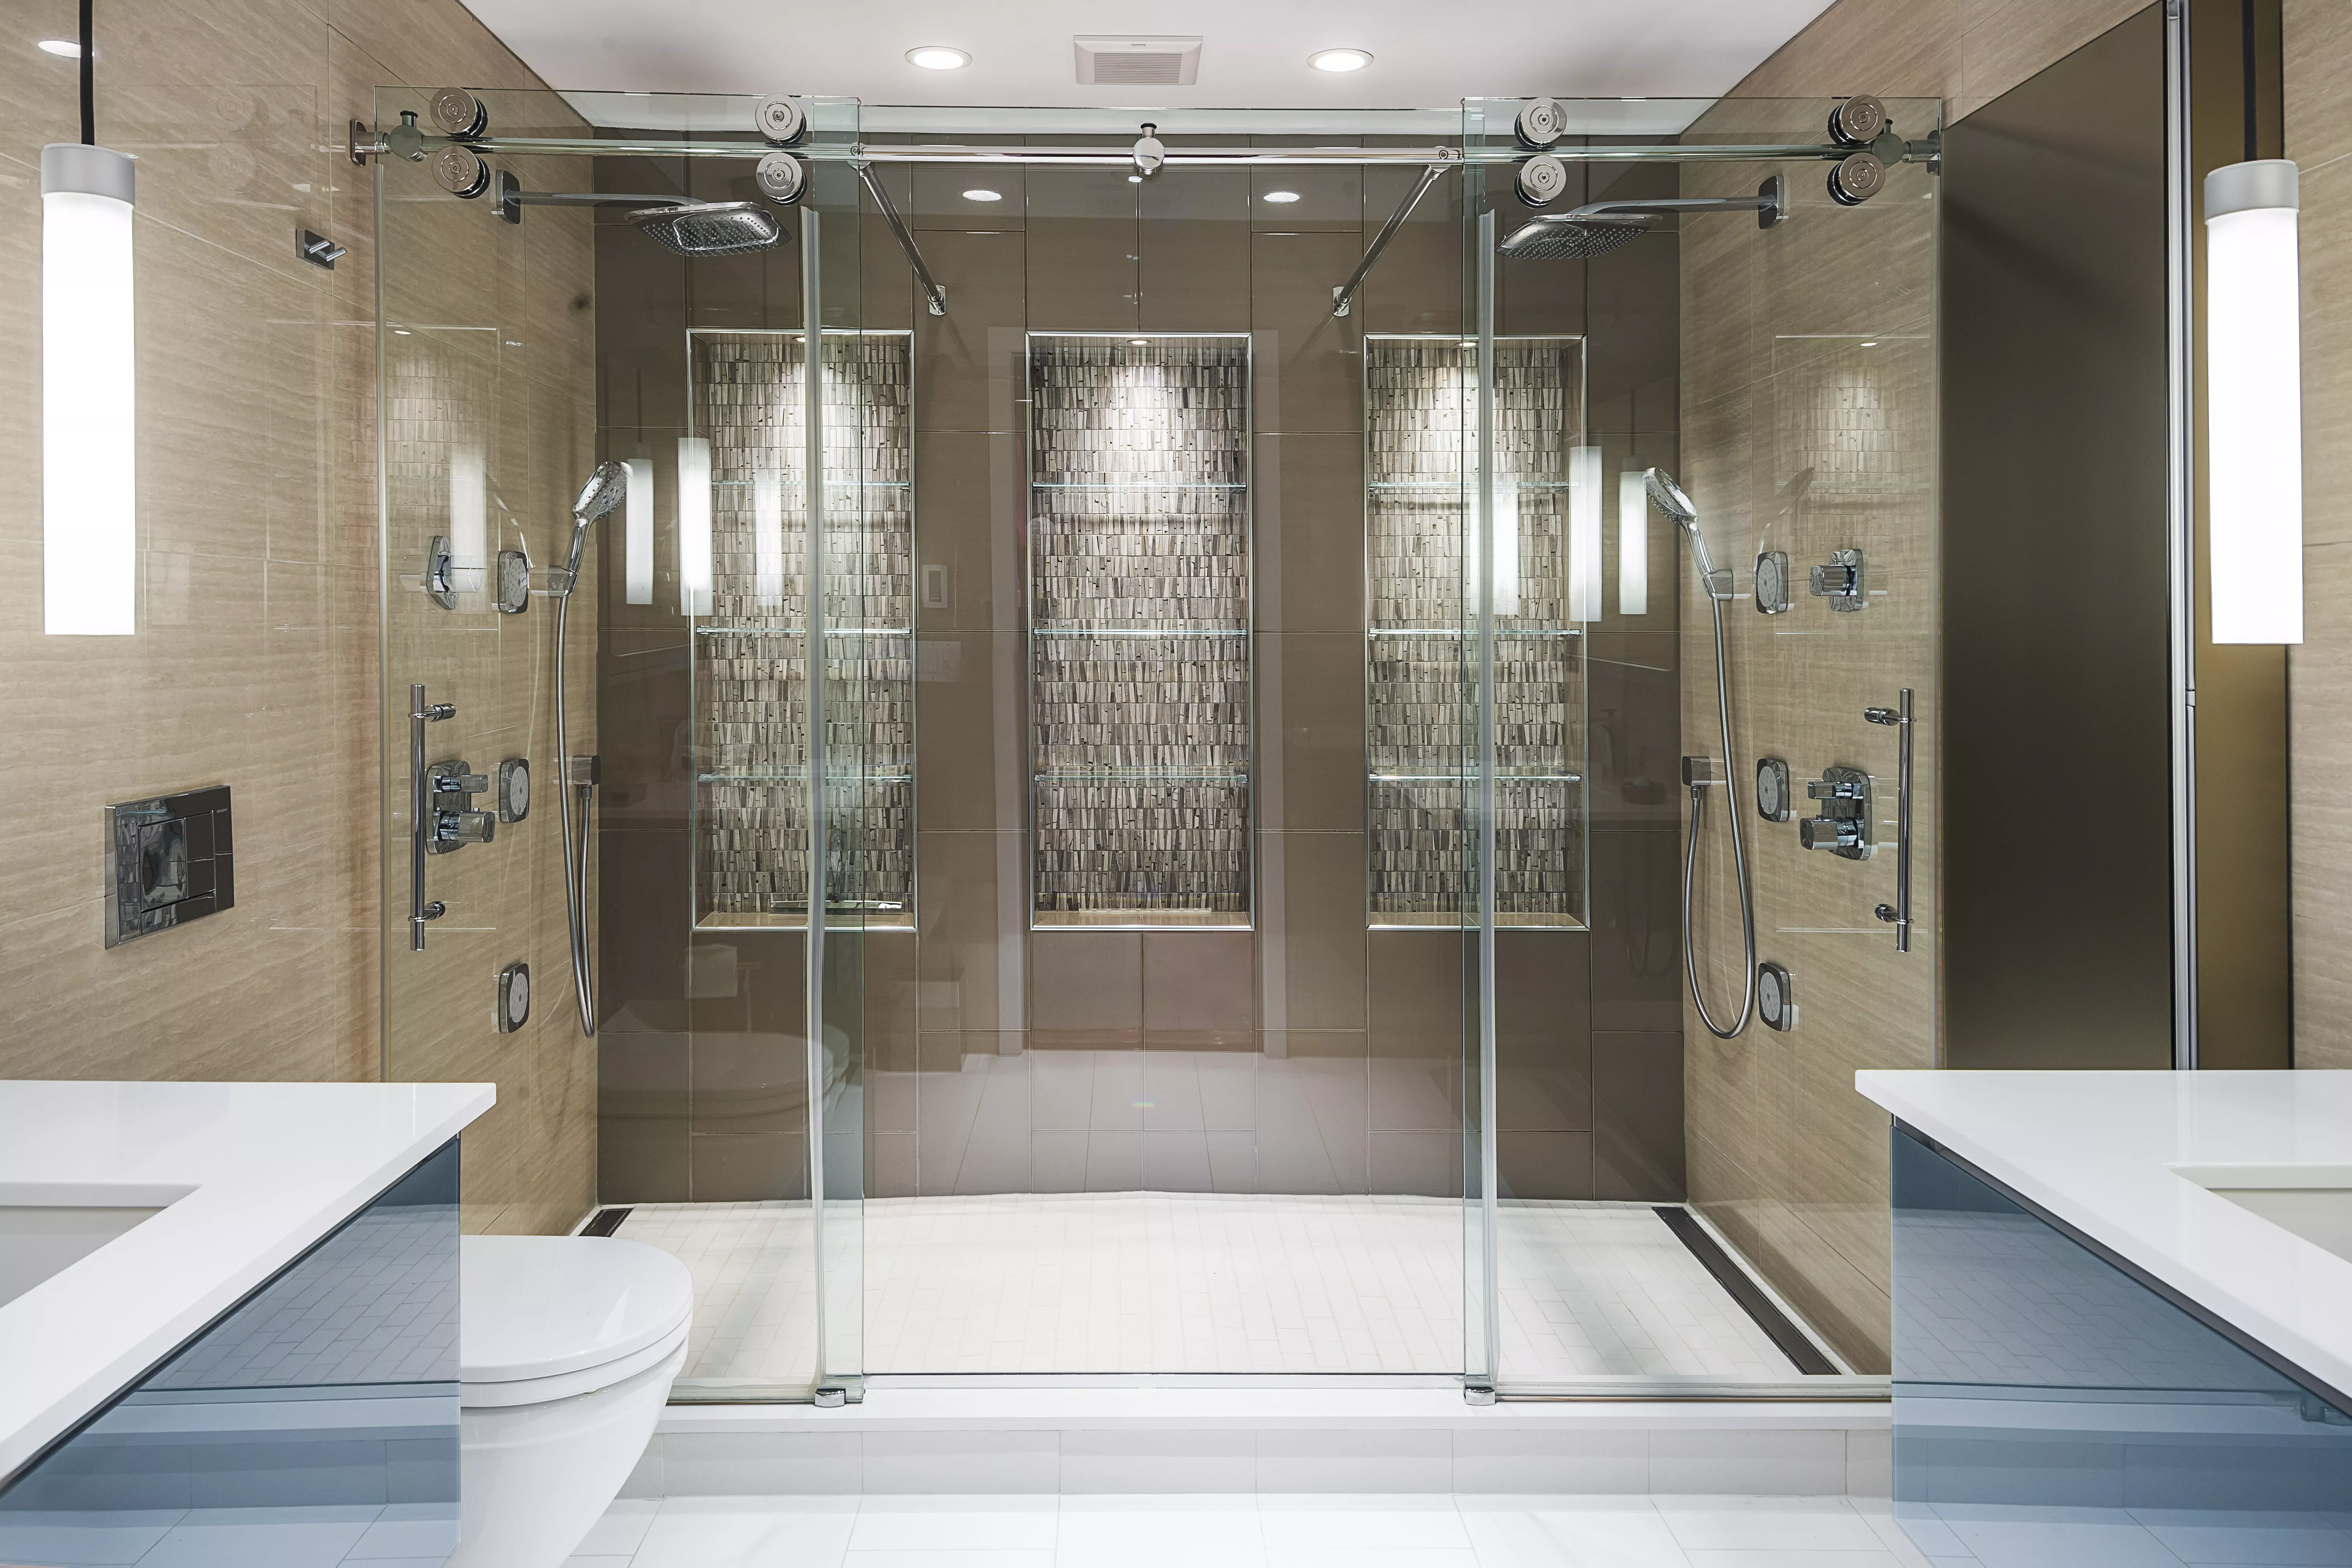 large double shower heads double vanity glass shower three storage spaces white countertop